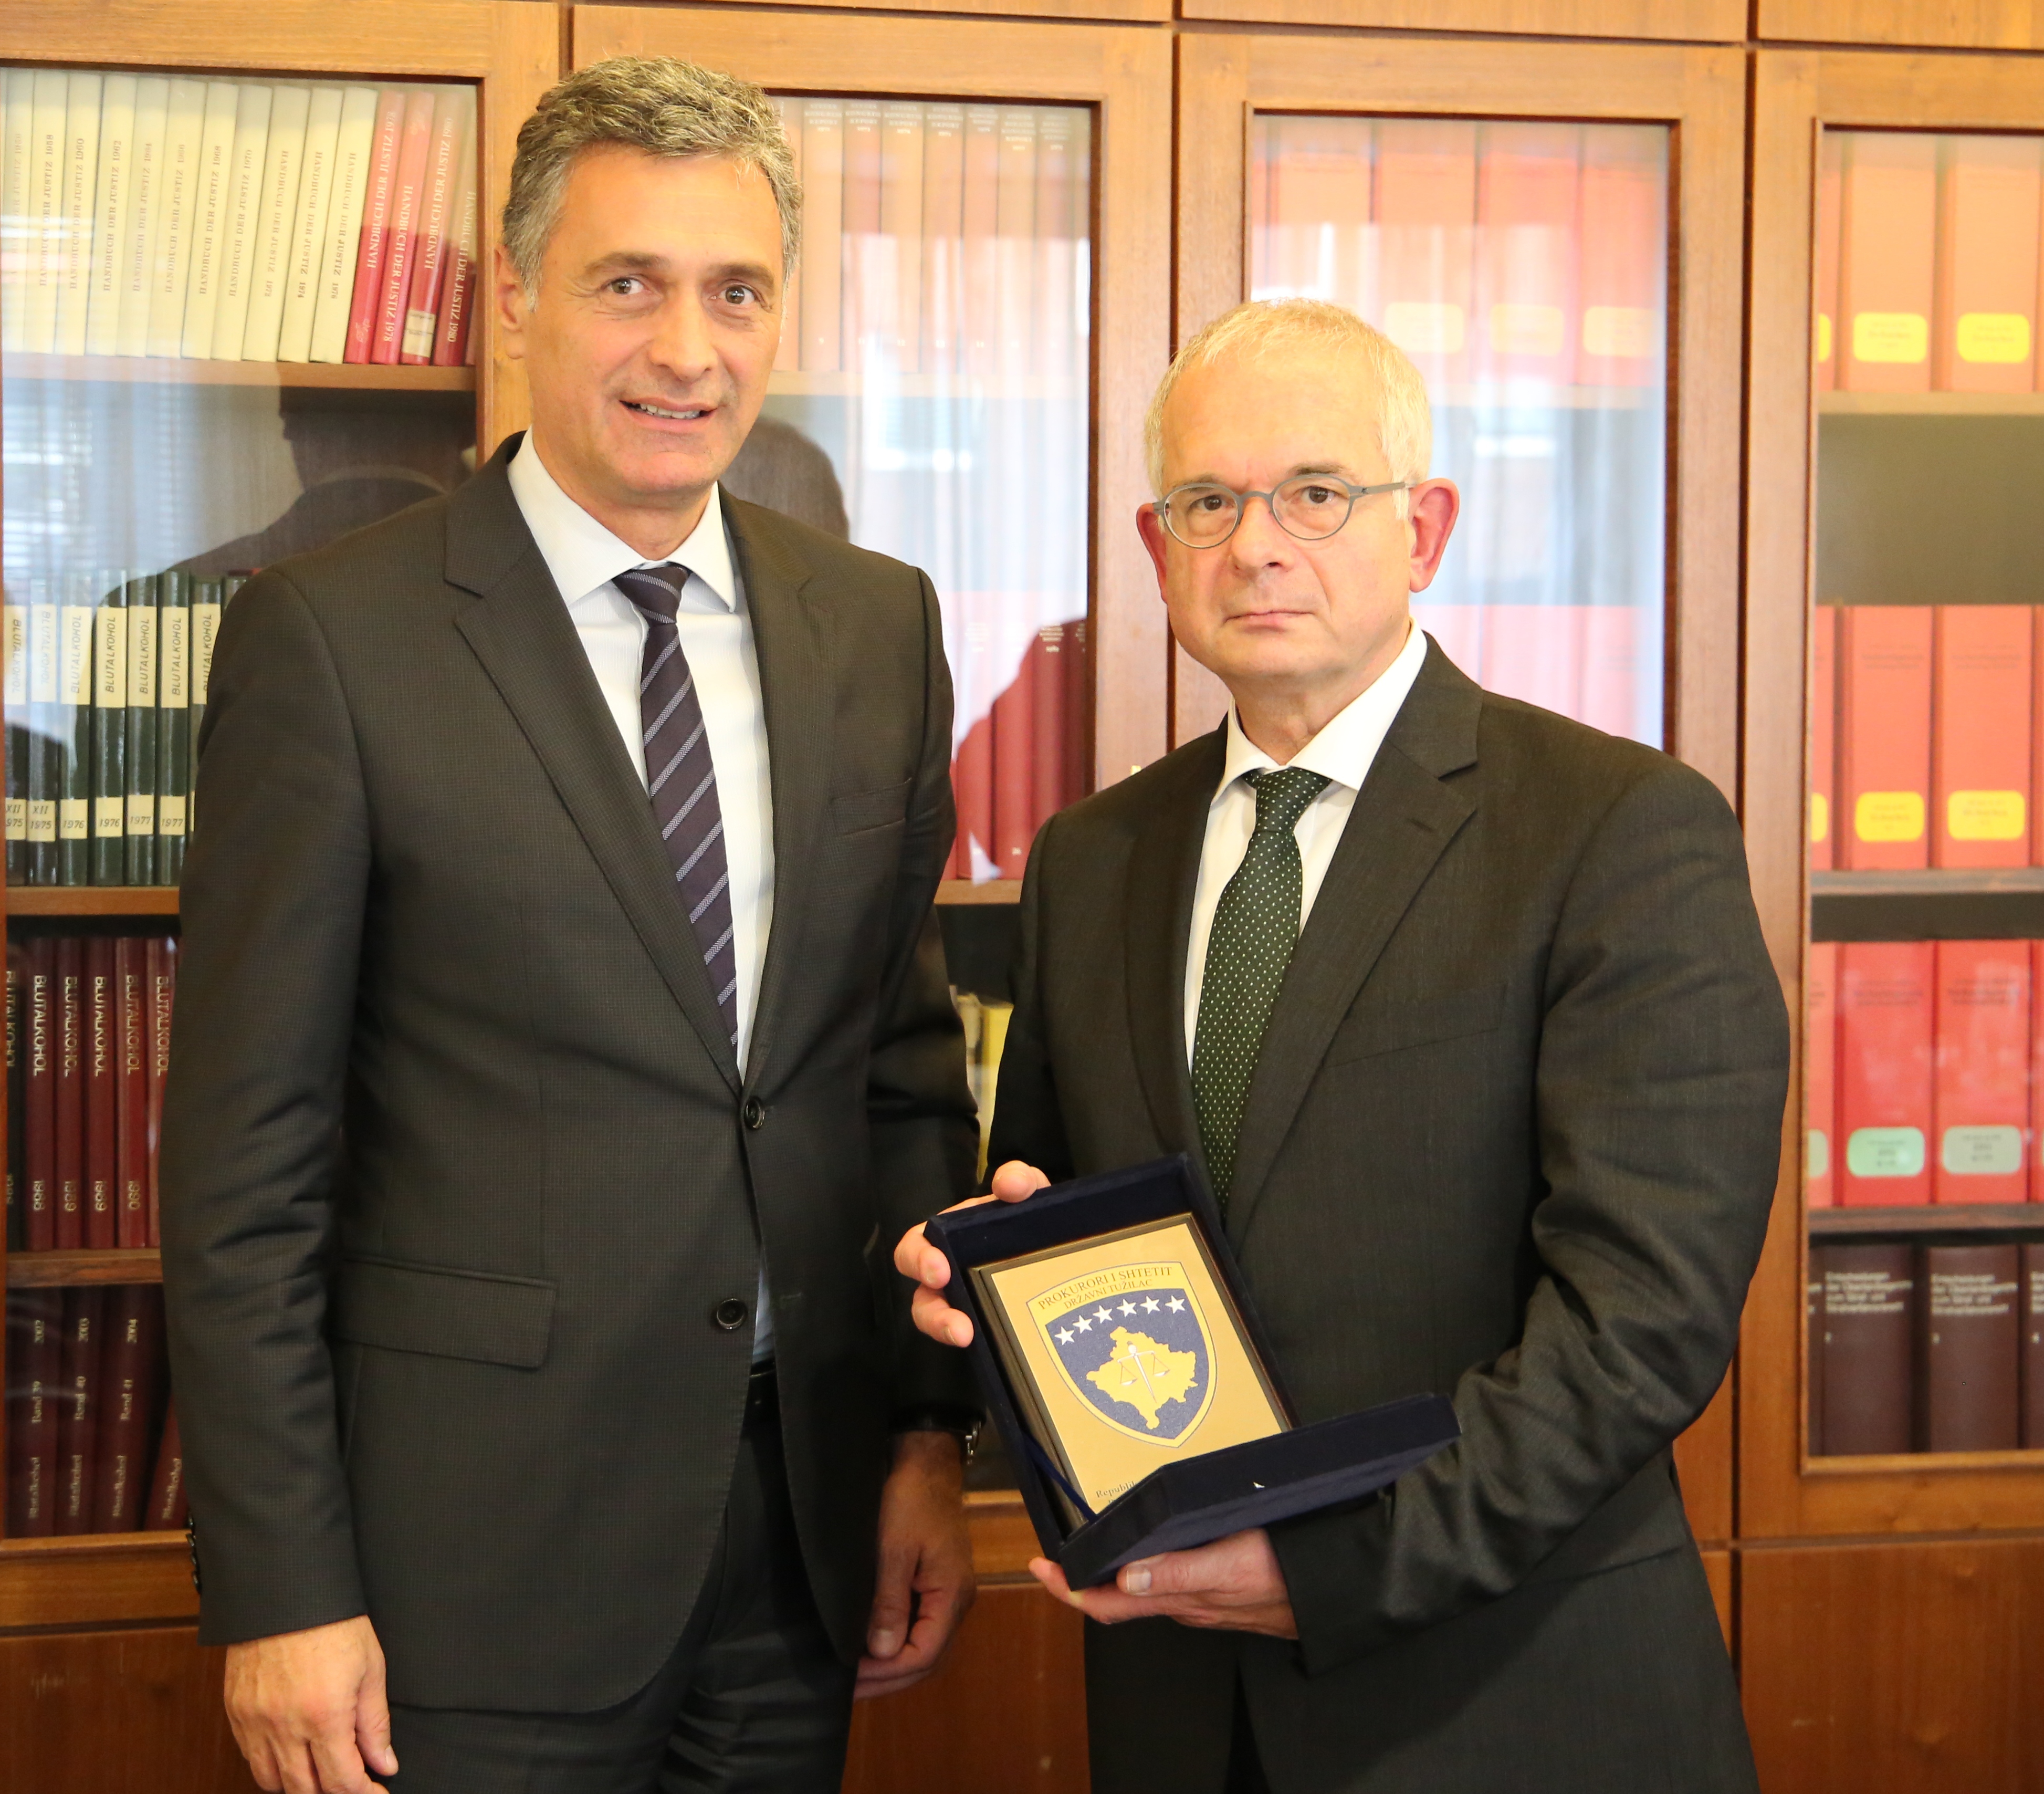 A delegation from the prosecutorial system of Kosova, led by Chief State Prosecutor, Aleksandër Lumezi, is staying for an official visit in Germany